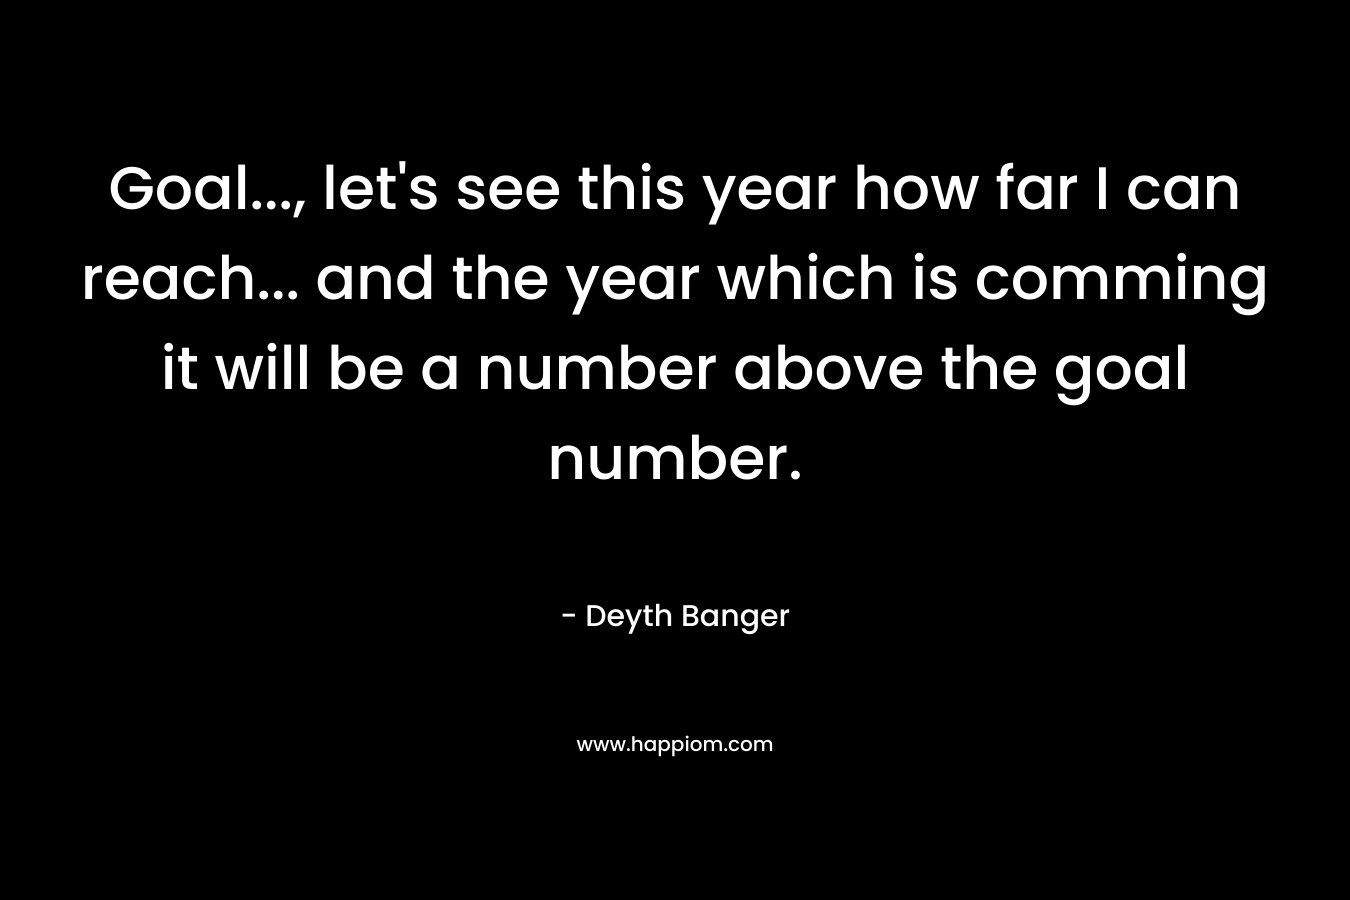 Goal…, let’s see this year how far I can reach… and the year which is comming it will be a number above the goal number. – Deyth Banger